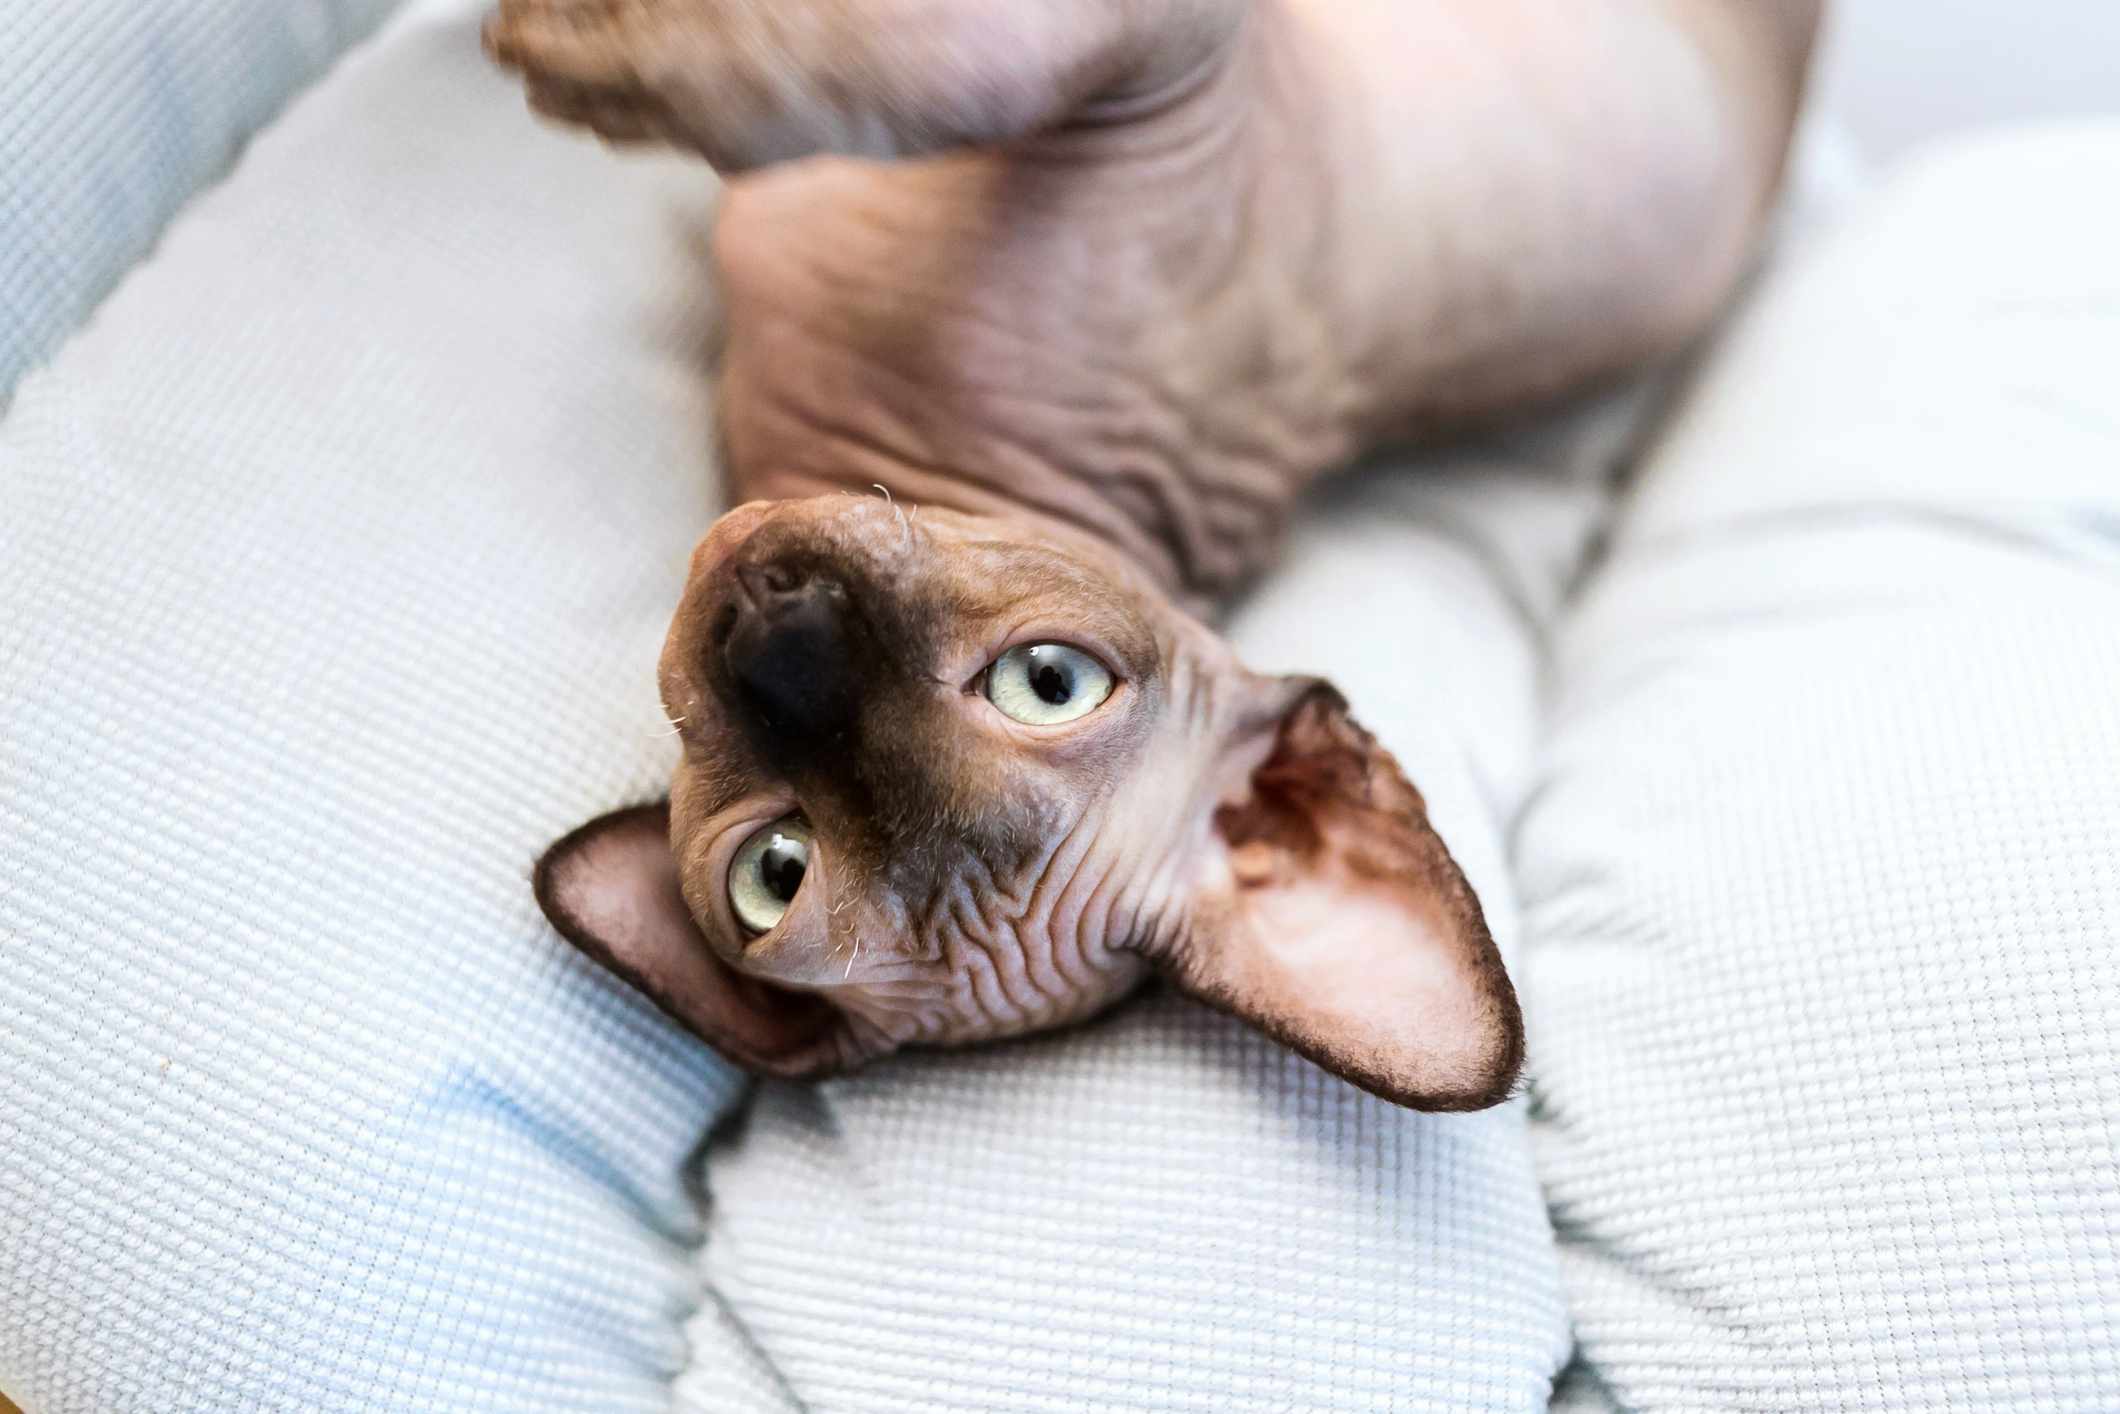 A hairless Sphynx cat laying on a bed looking at the camera while upside down.